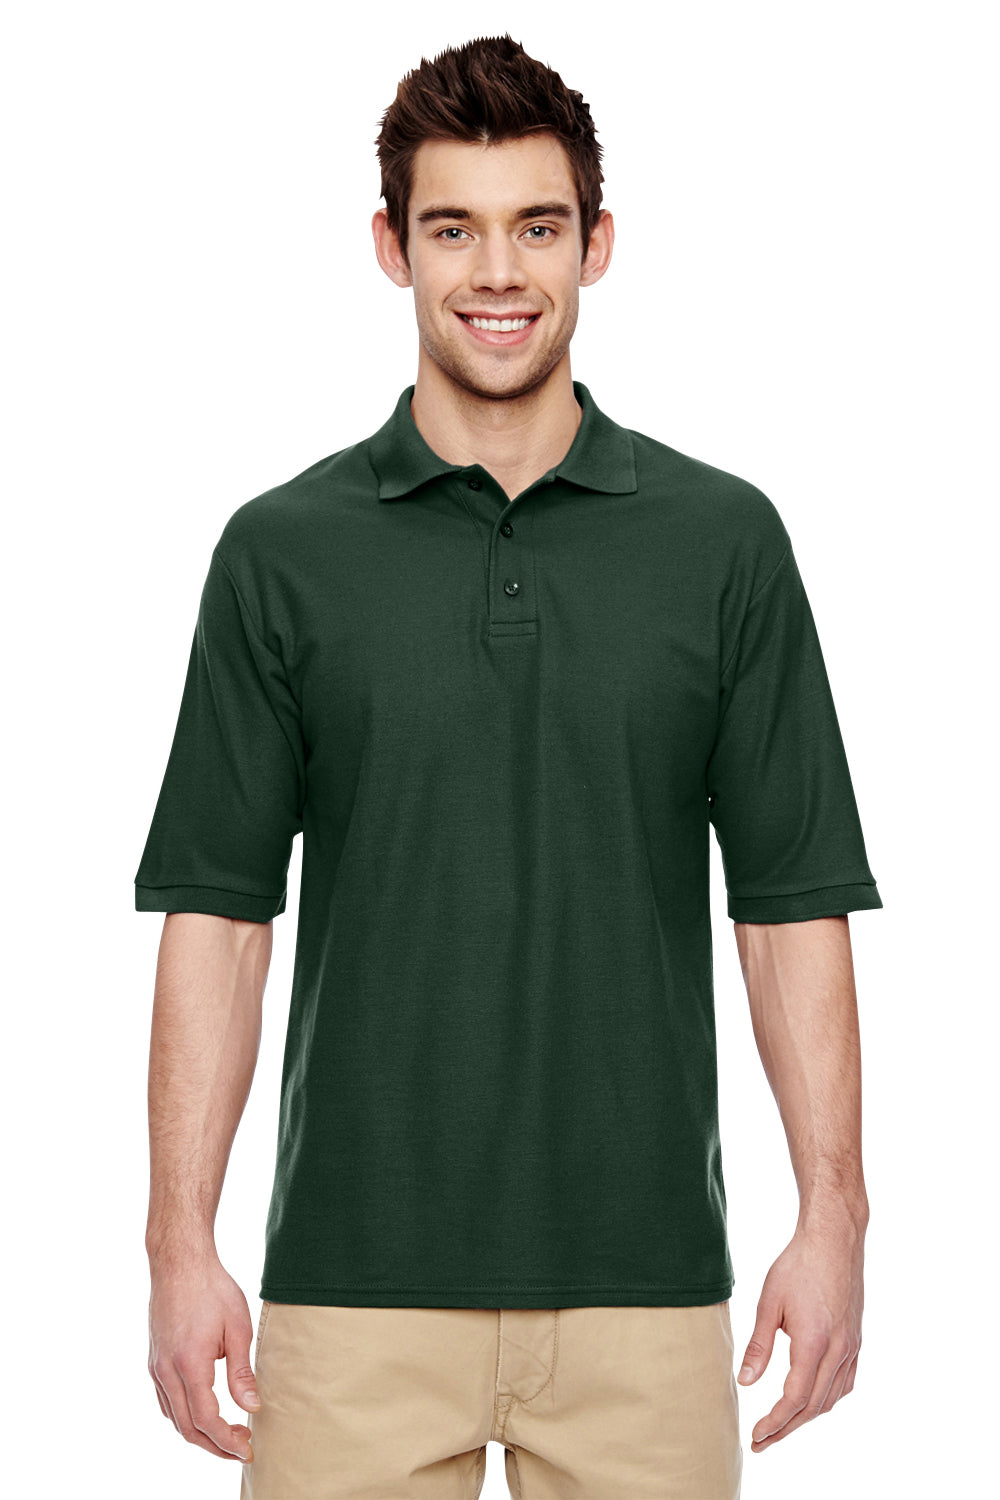 Jerzees 537MSR Mens Easy Care Moisture Wicking Short Sleeve Polo Shirt Forest Green Front